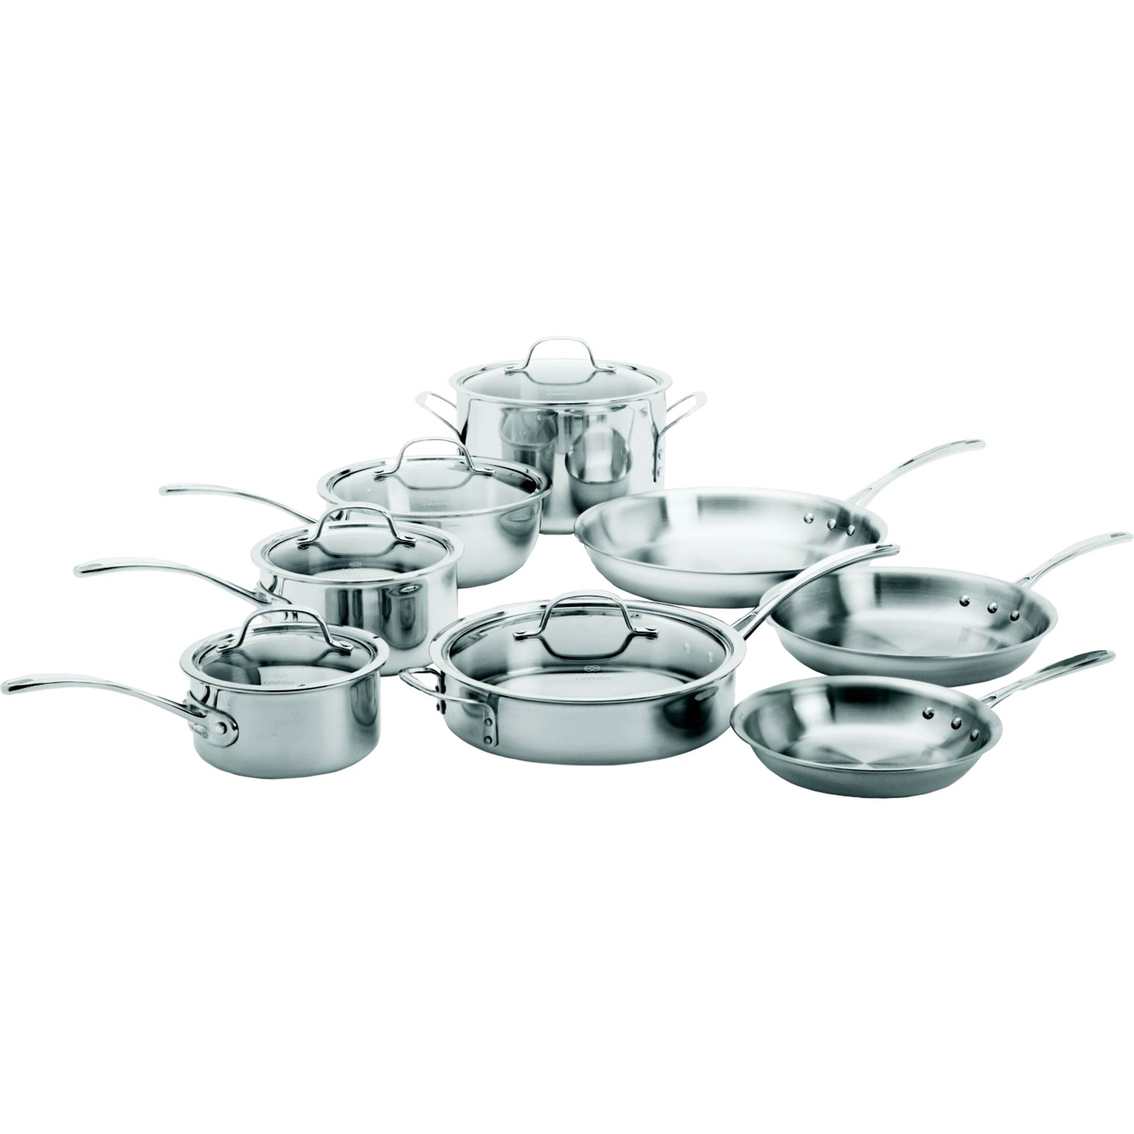 Calphalon Triply 13-piece Stainless Steel Cookware, Stainless Steel, Household